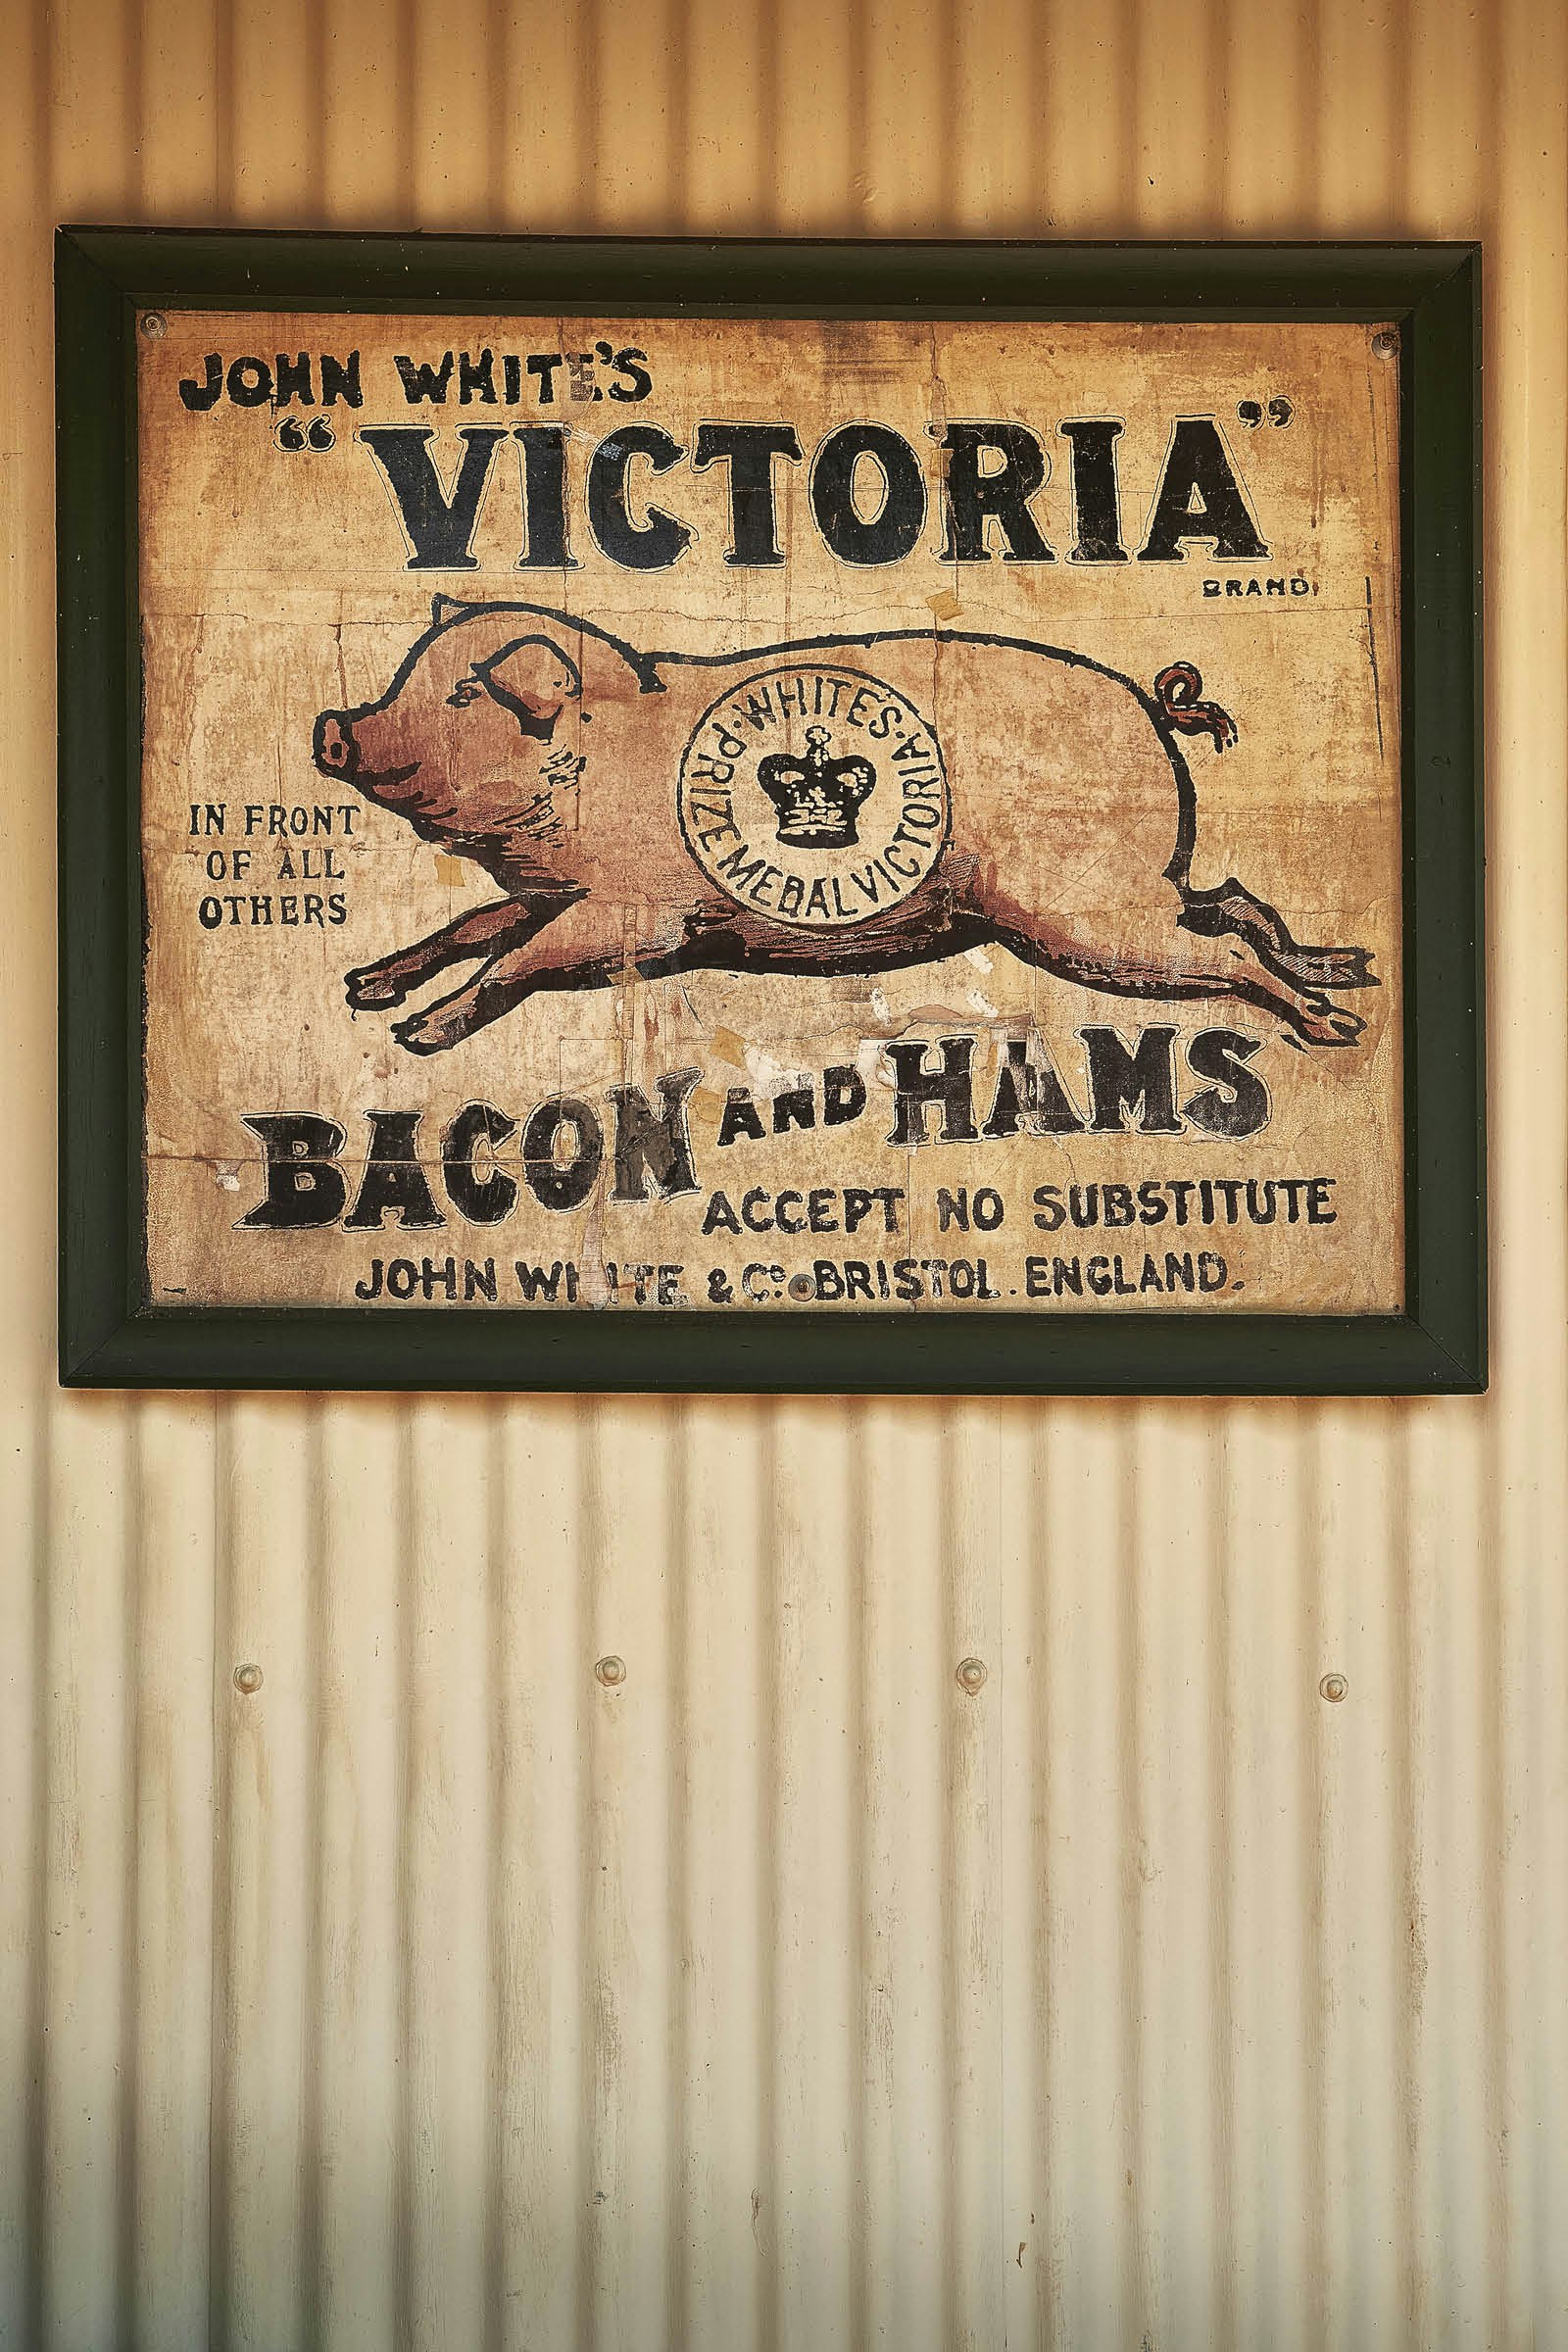 A vintage sign for bacon and ham at The Vine, a pub in Pilgrim’s Rest